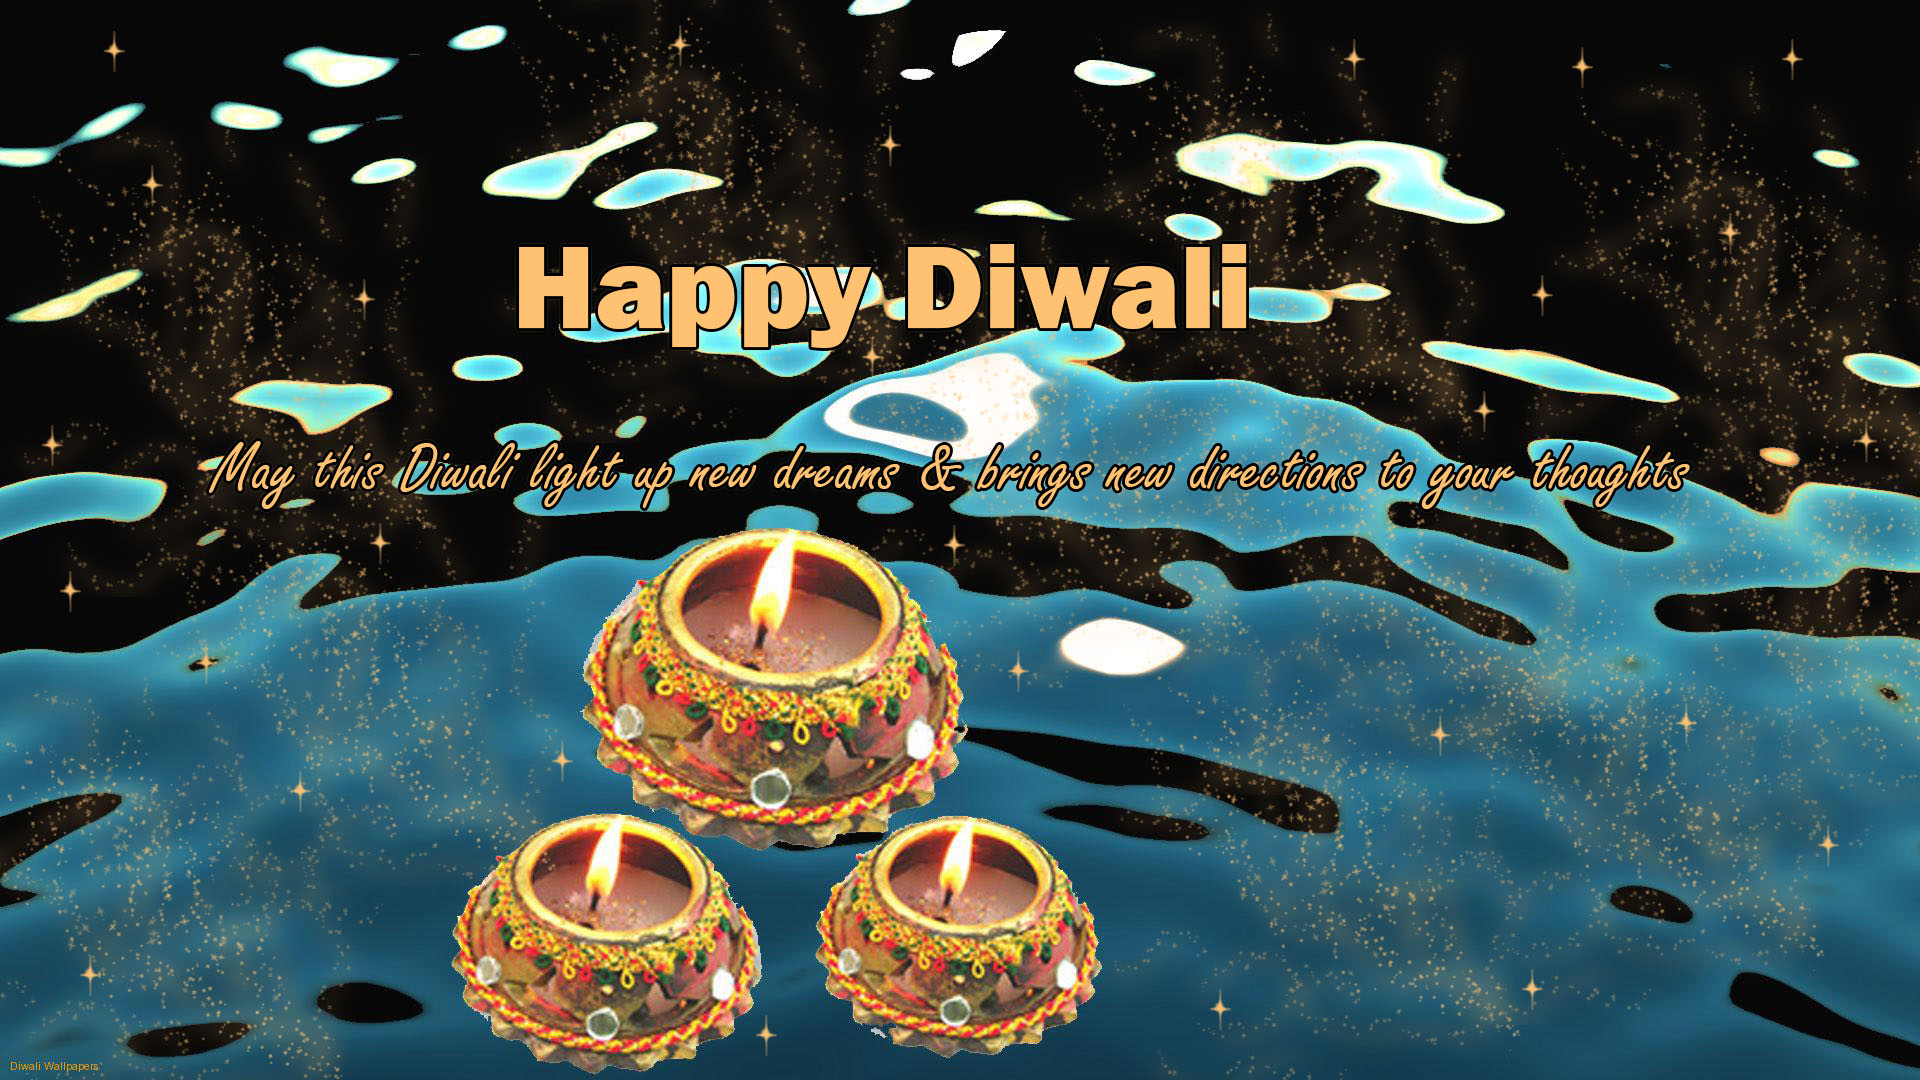 happy-diwali-hd-wallpapers-wishes-images-quotes-2017